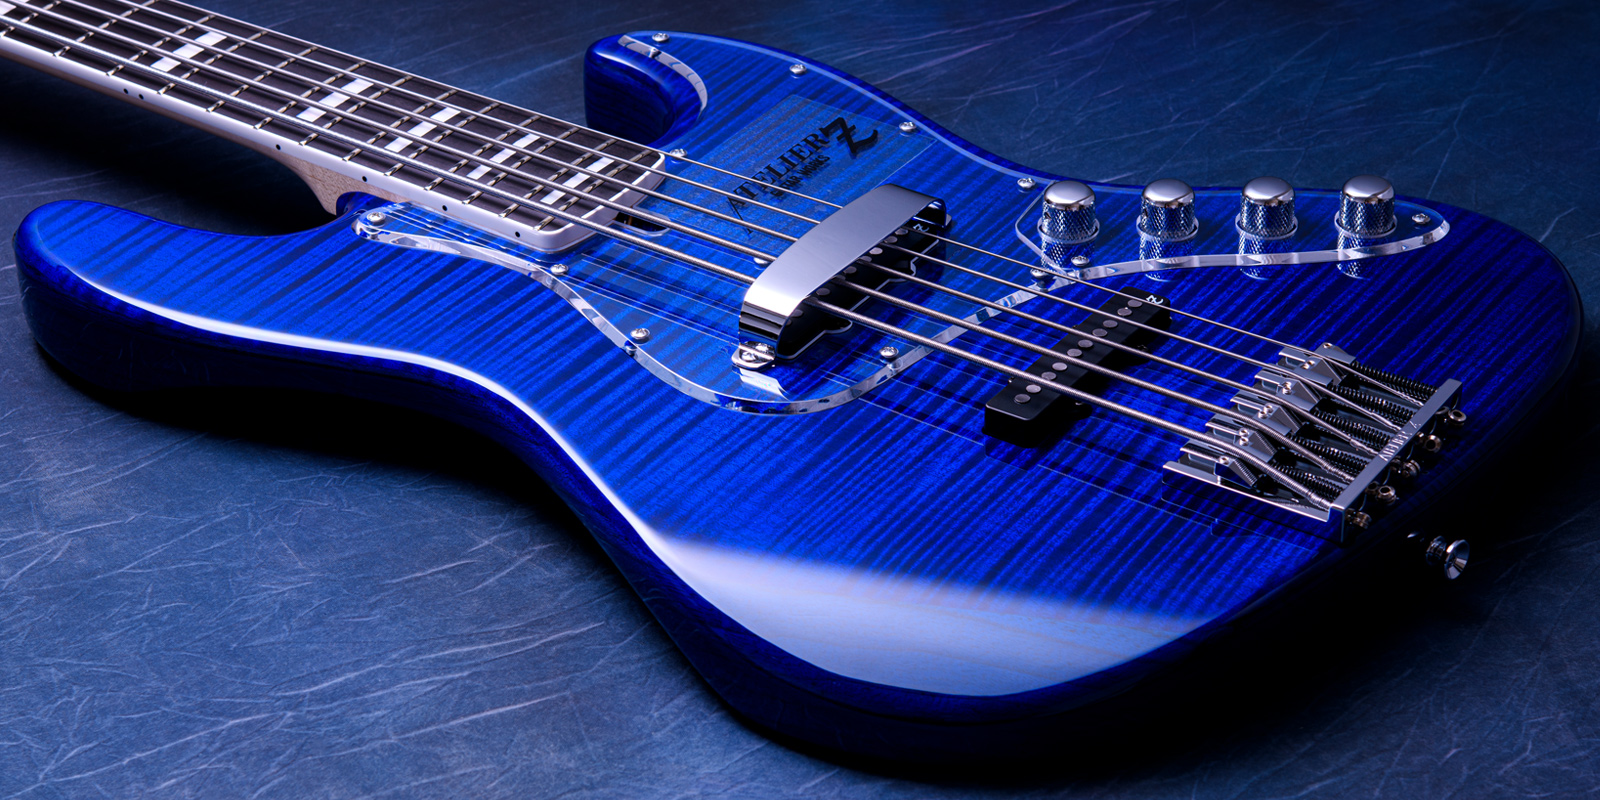 Atelier Z MZ Custom 5 Flame Maple Top Transparent Blue Black Line with Matching Headstock